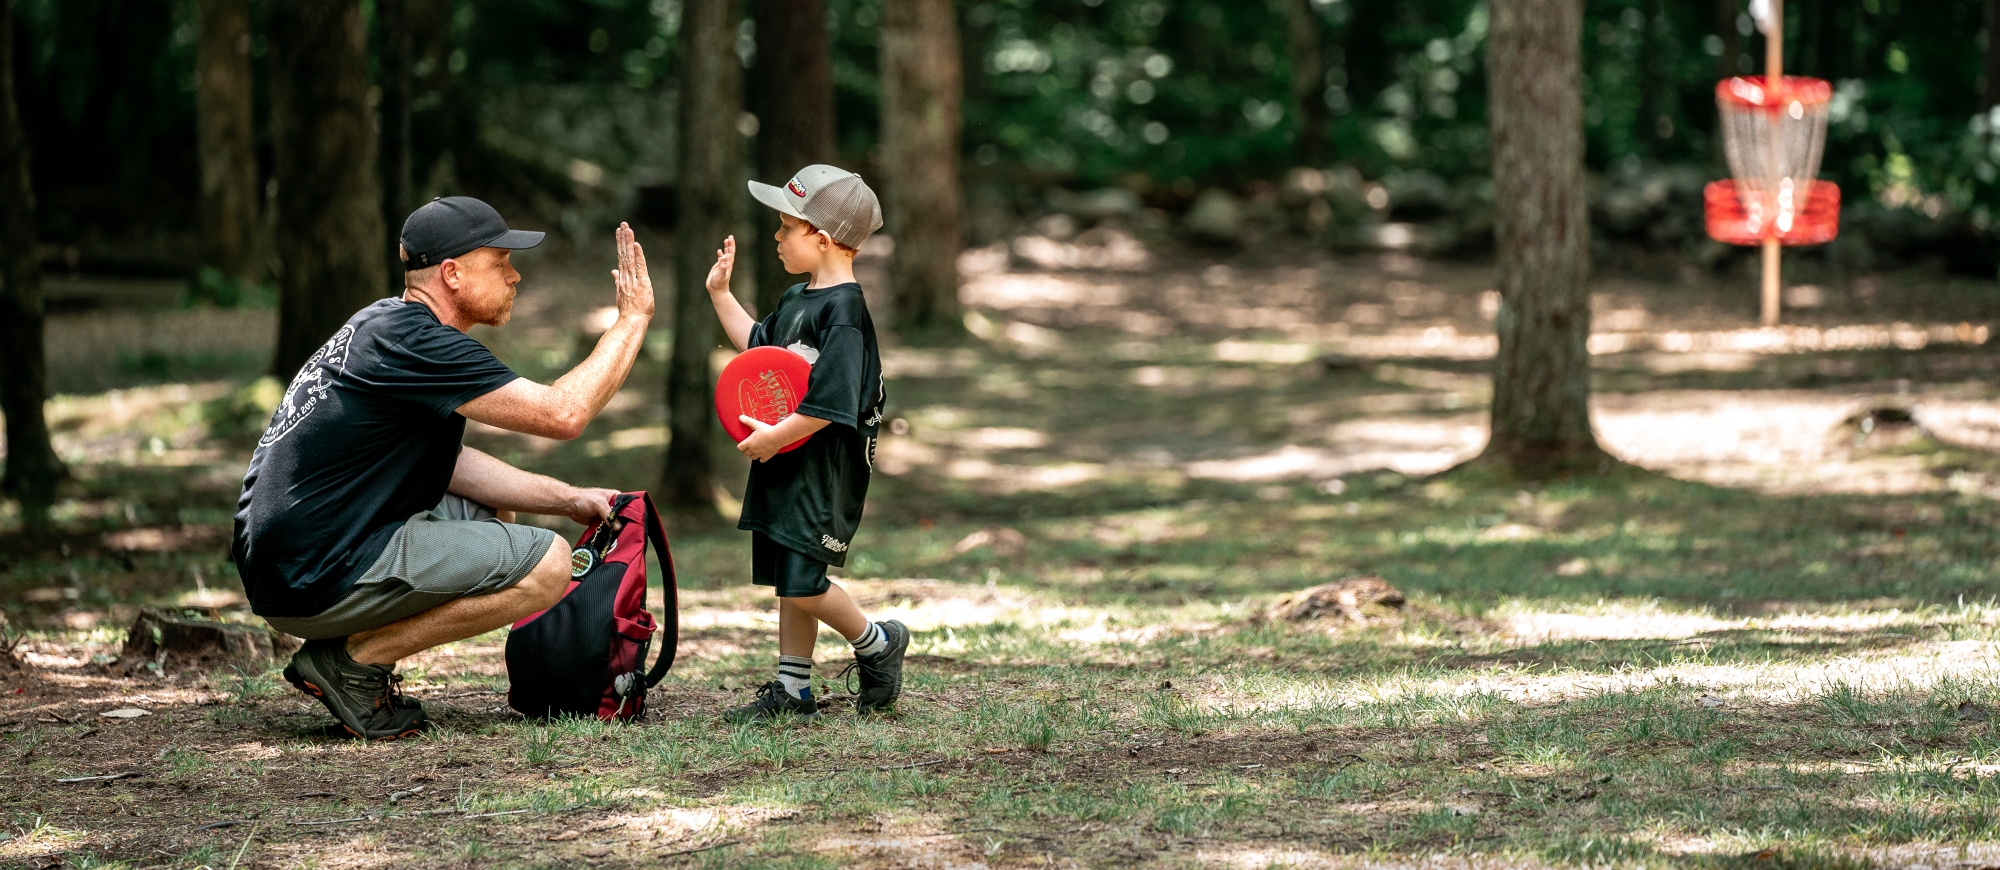 Man giving a high 5 to a small child at a disc golf course